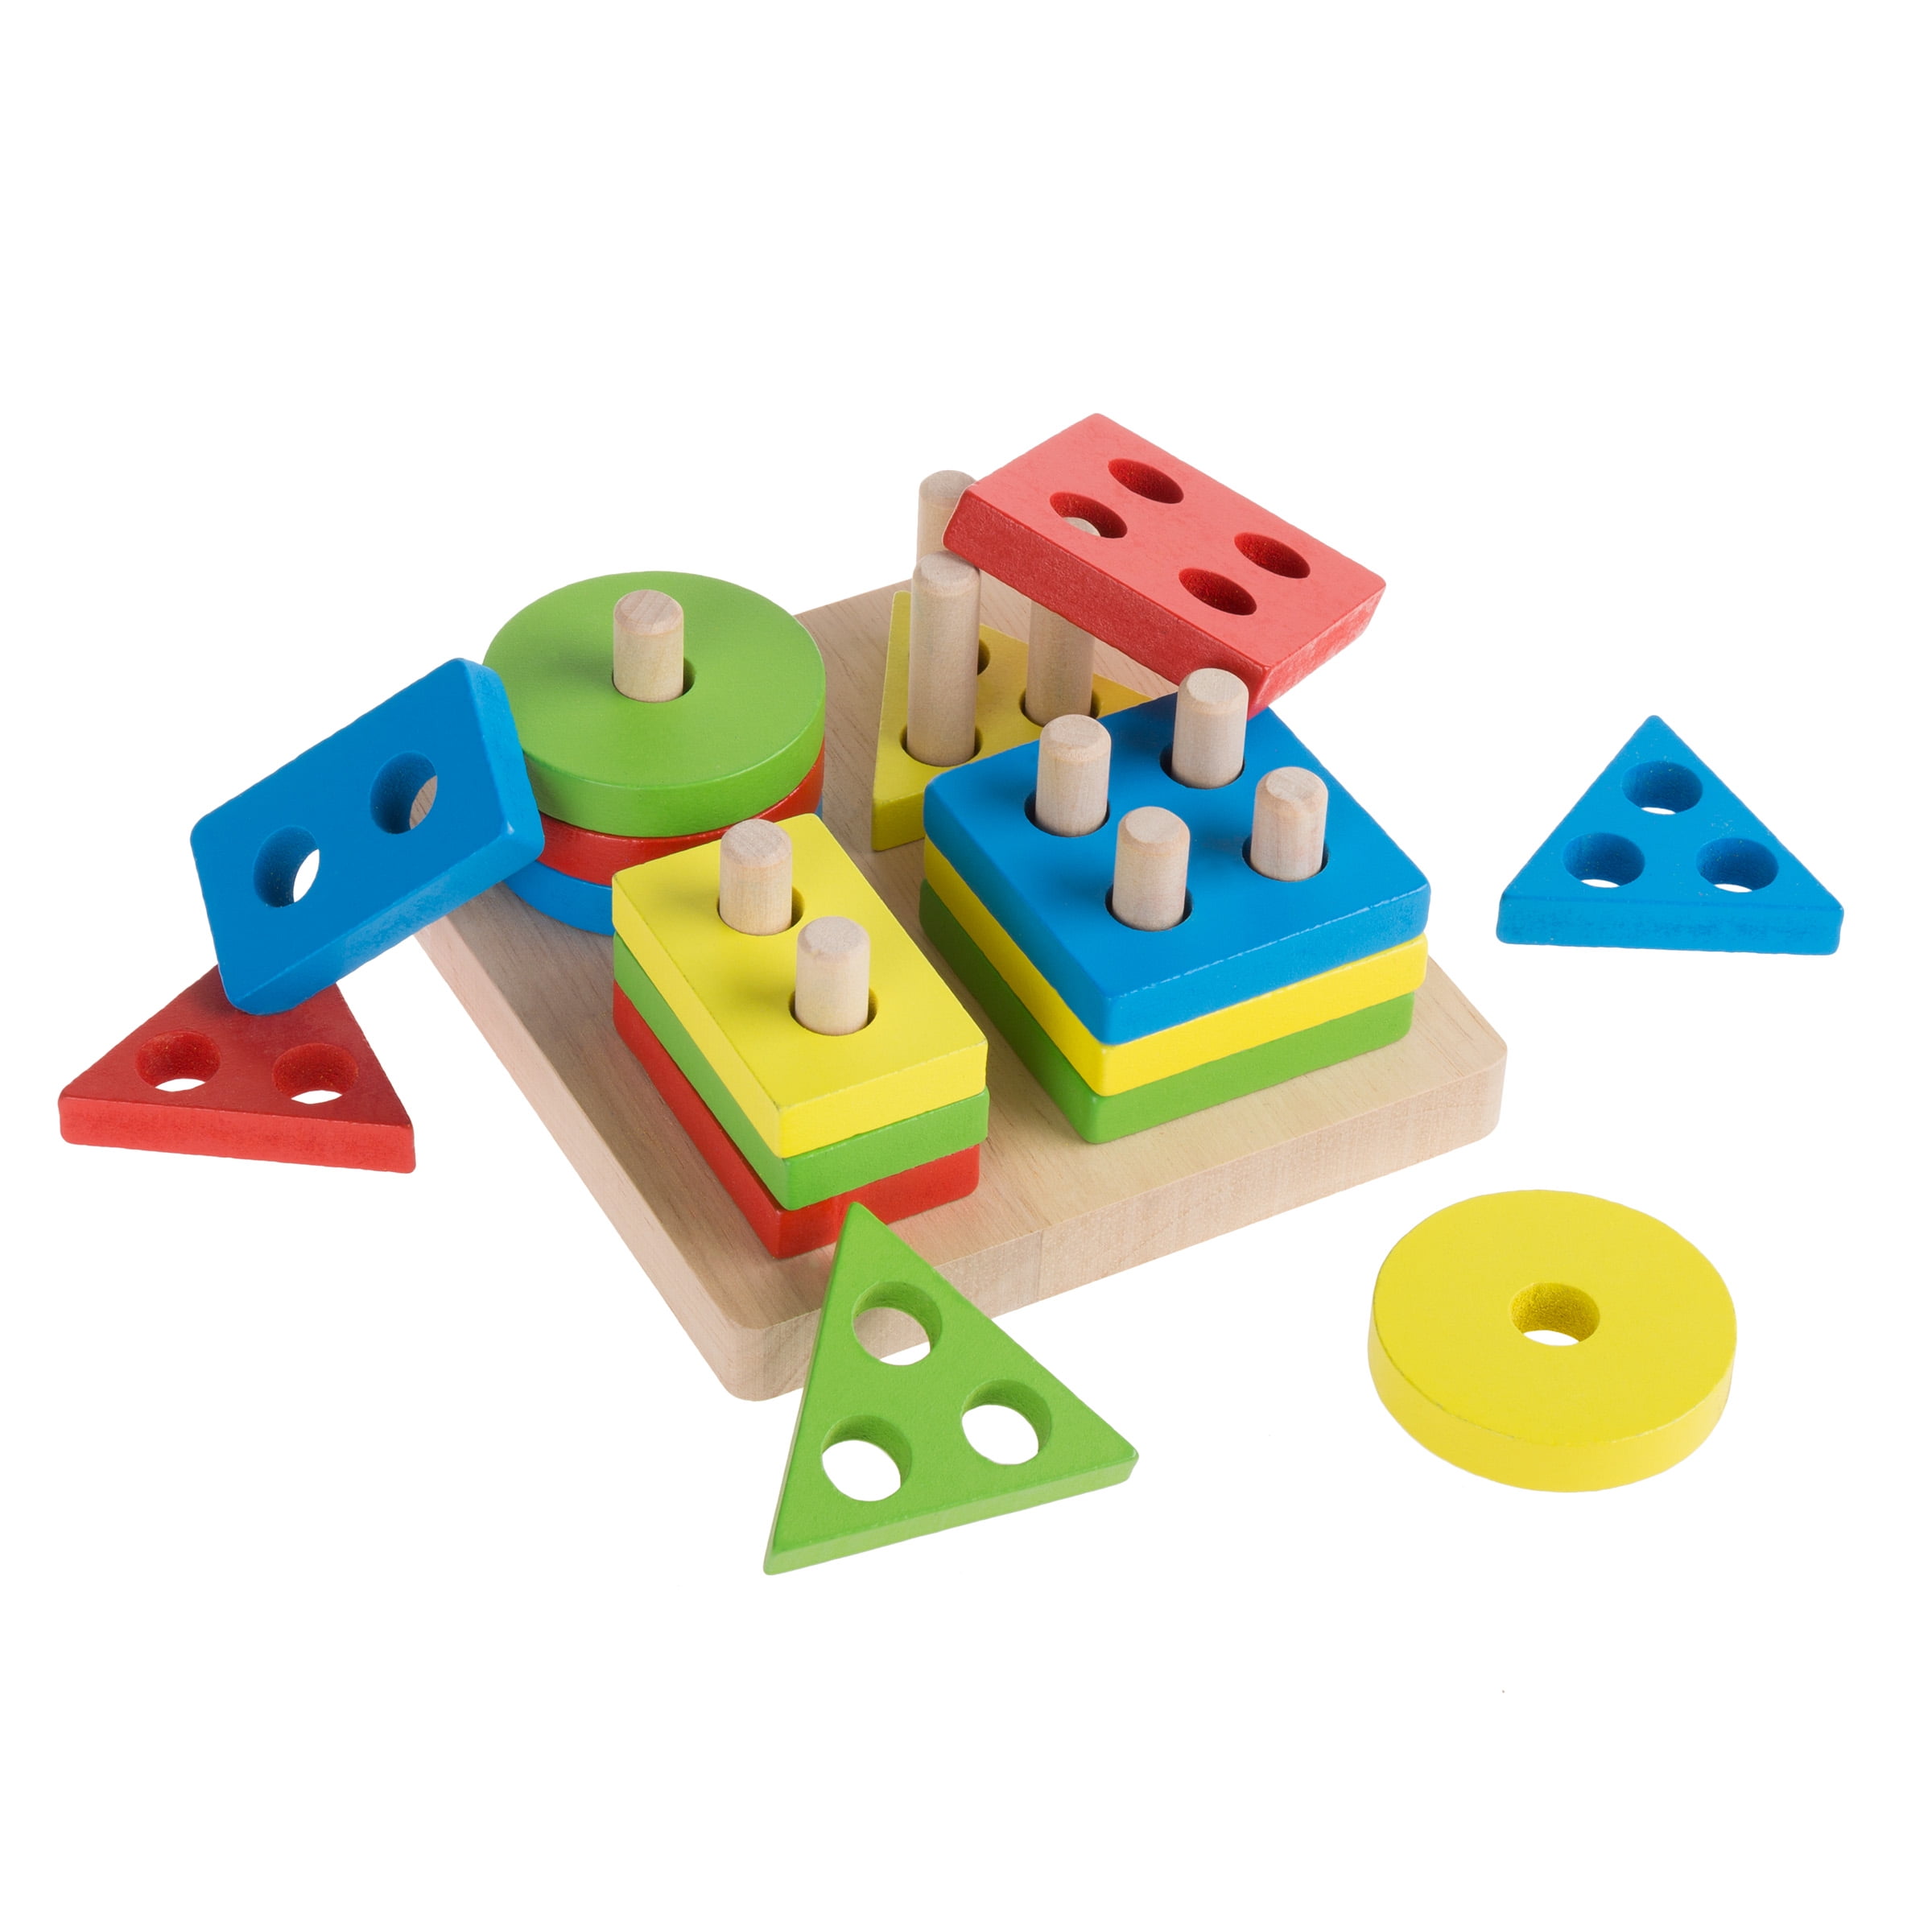 Wooden Shape Sorter-Classic Puzzle Toy with Geometric Shapes